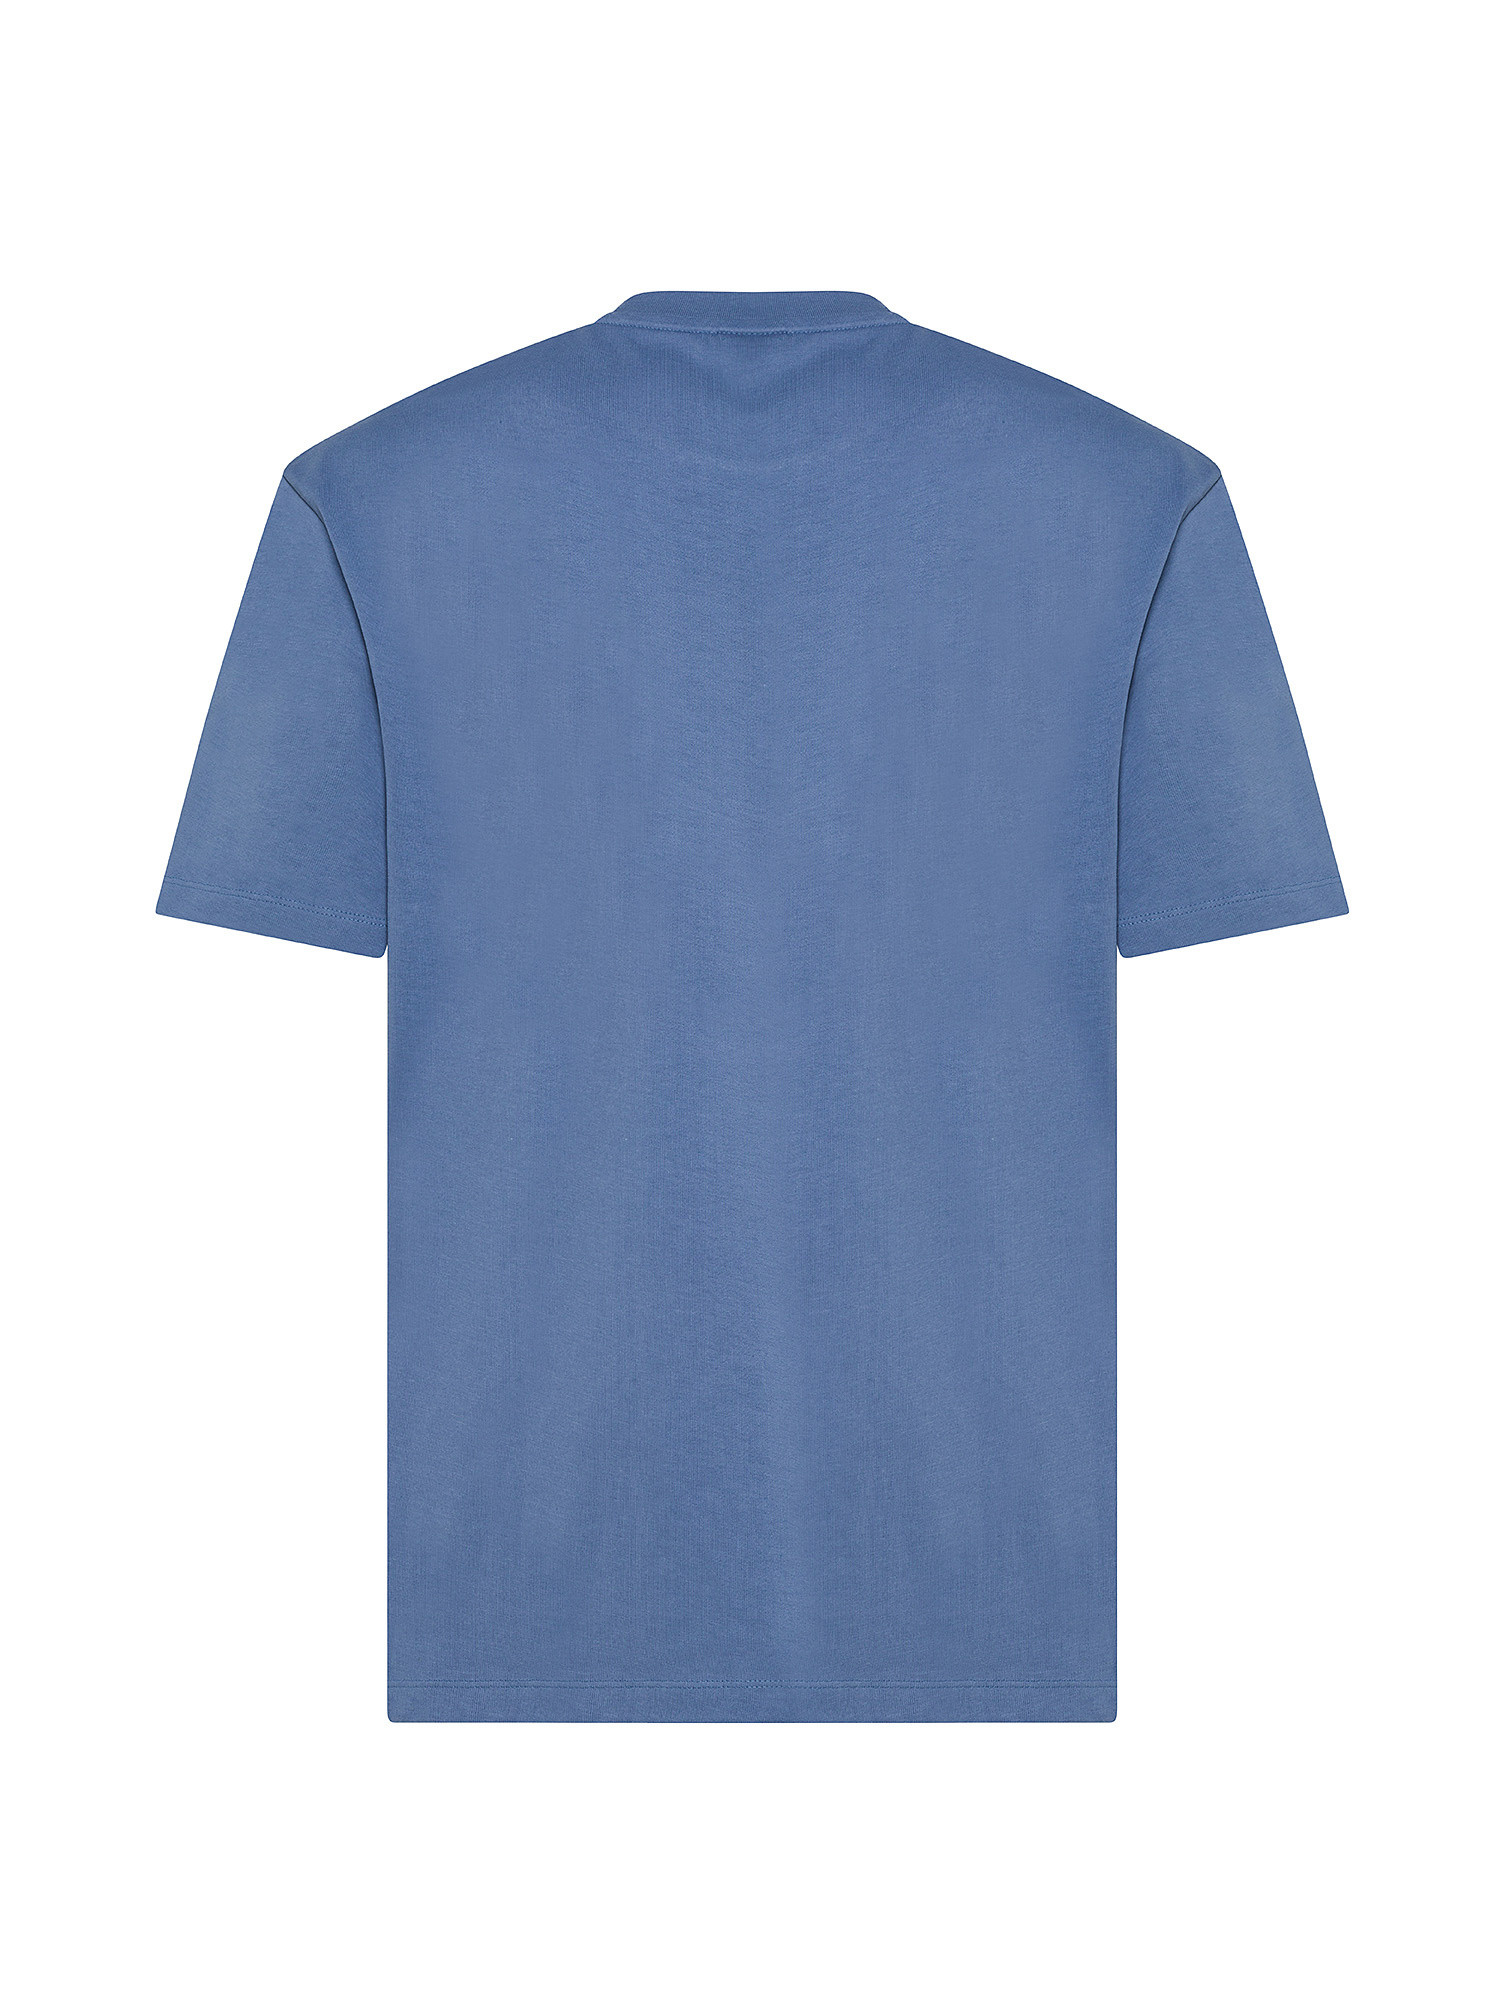 Hugo - T-shirt con stampa logo in cotone, Azzurro, large image number 1